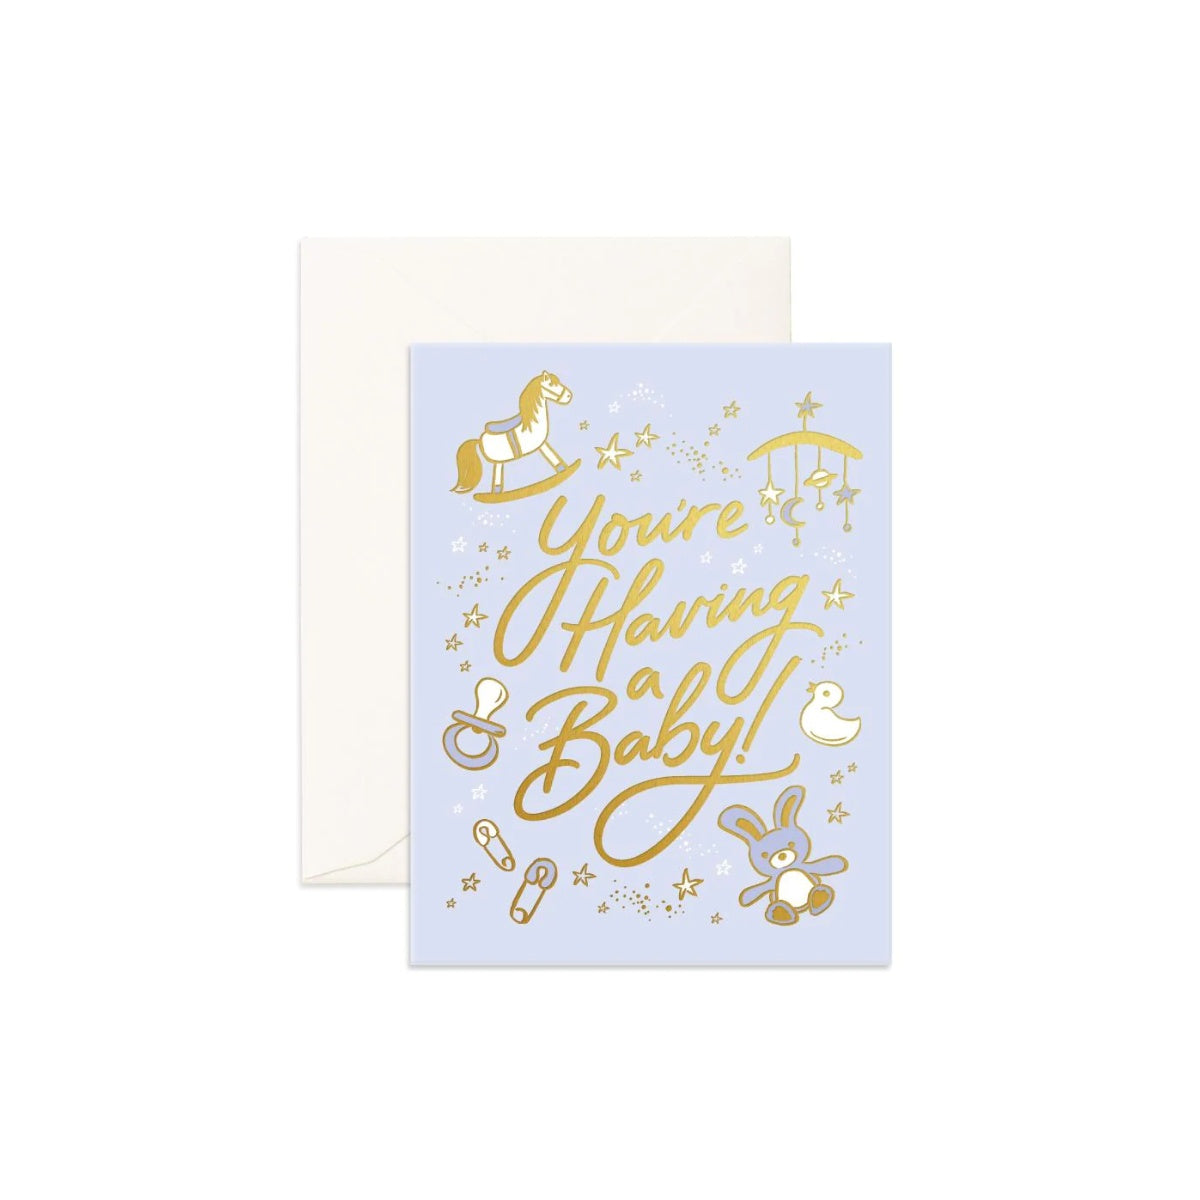 Having a Baby Greeting Card